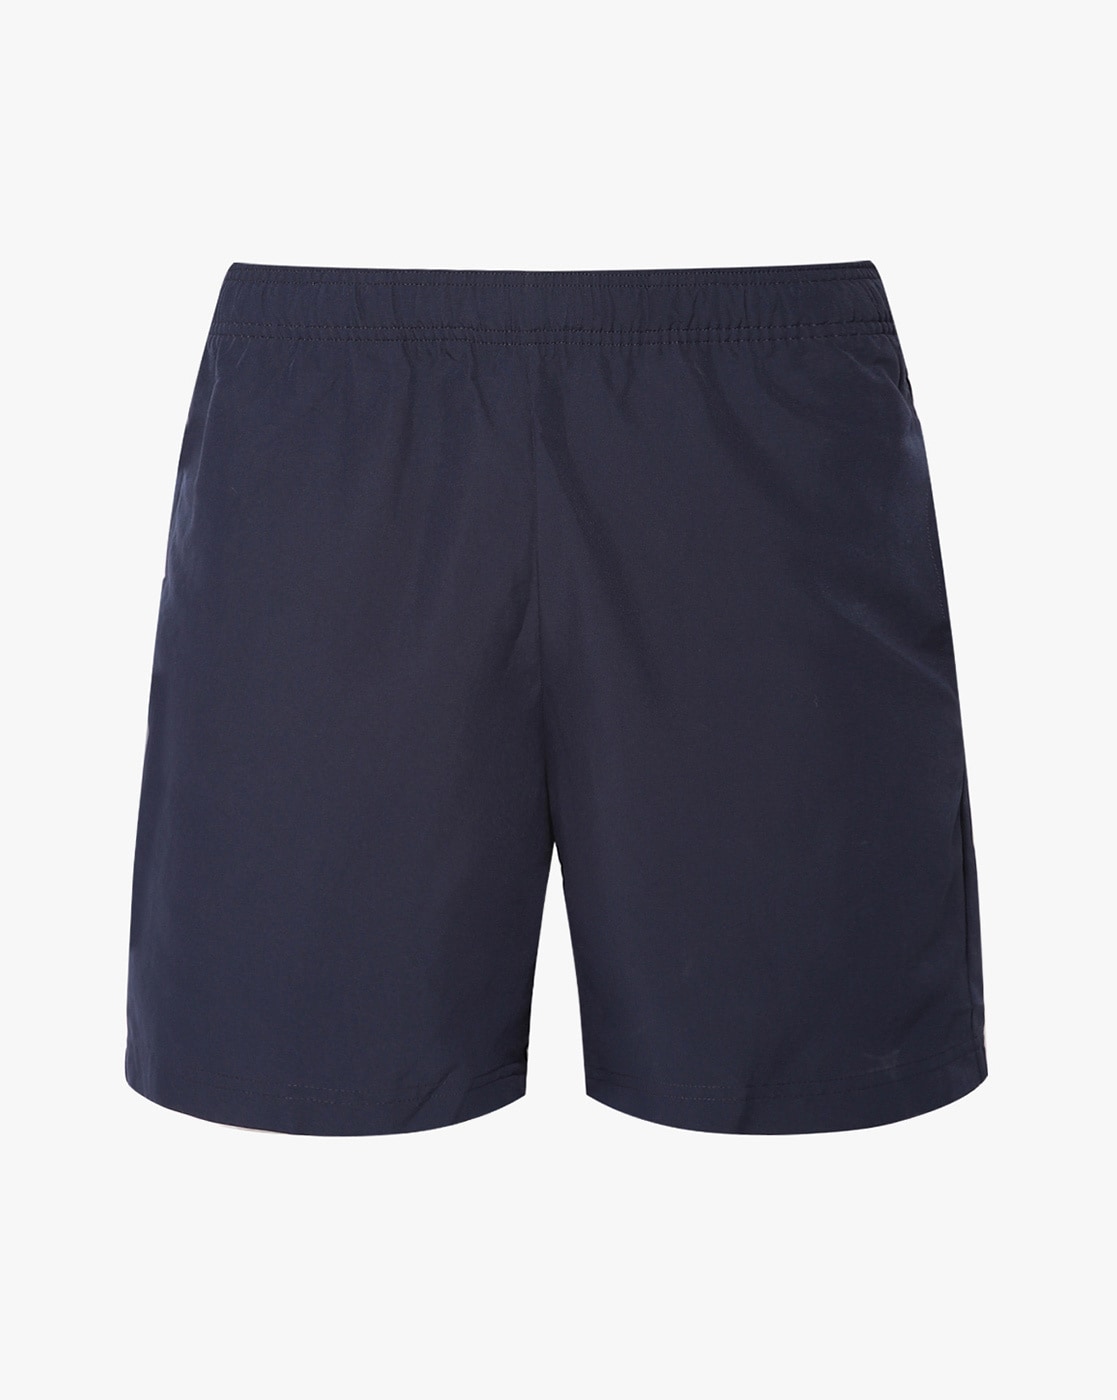 Buy Blue Shorts & 3/4ths for Men by ADIDAS Online